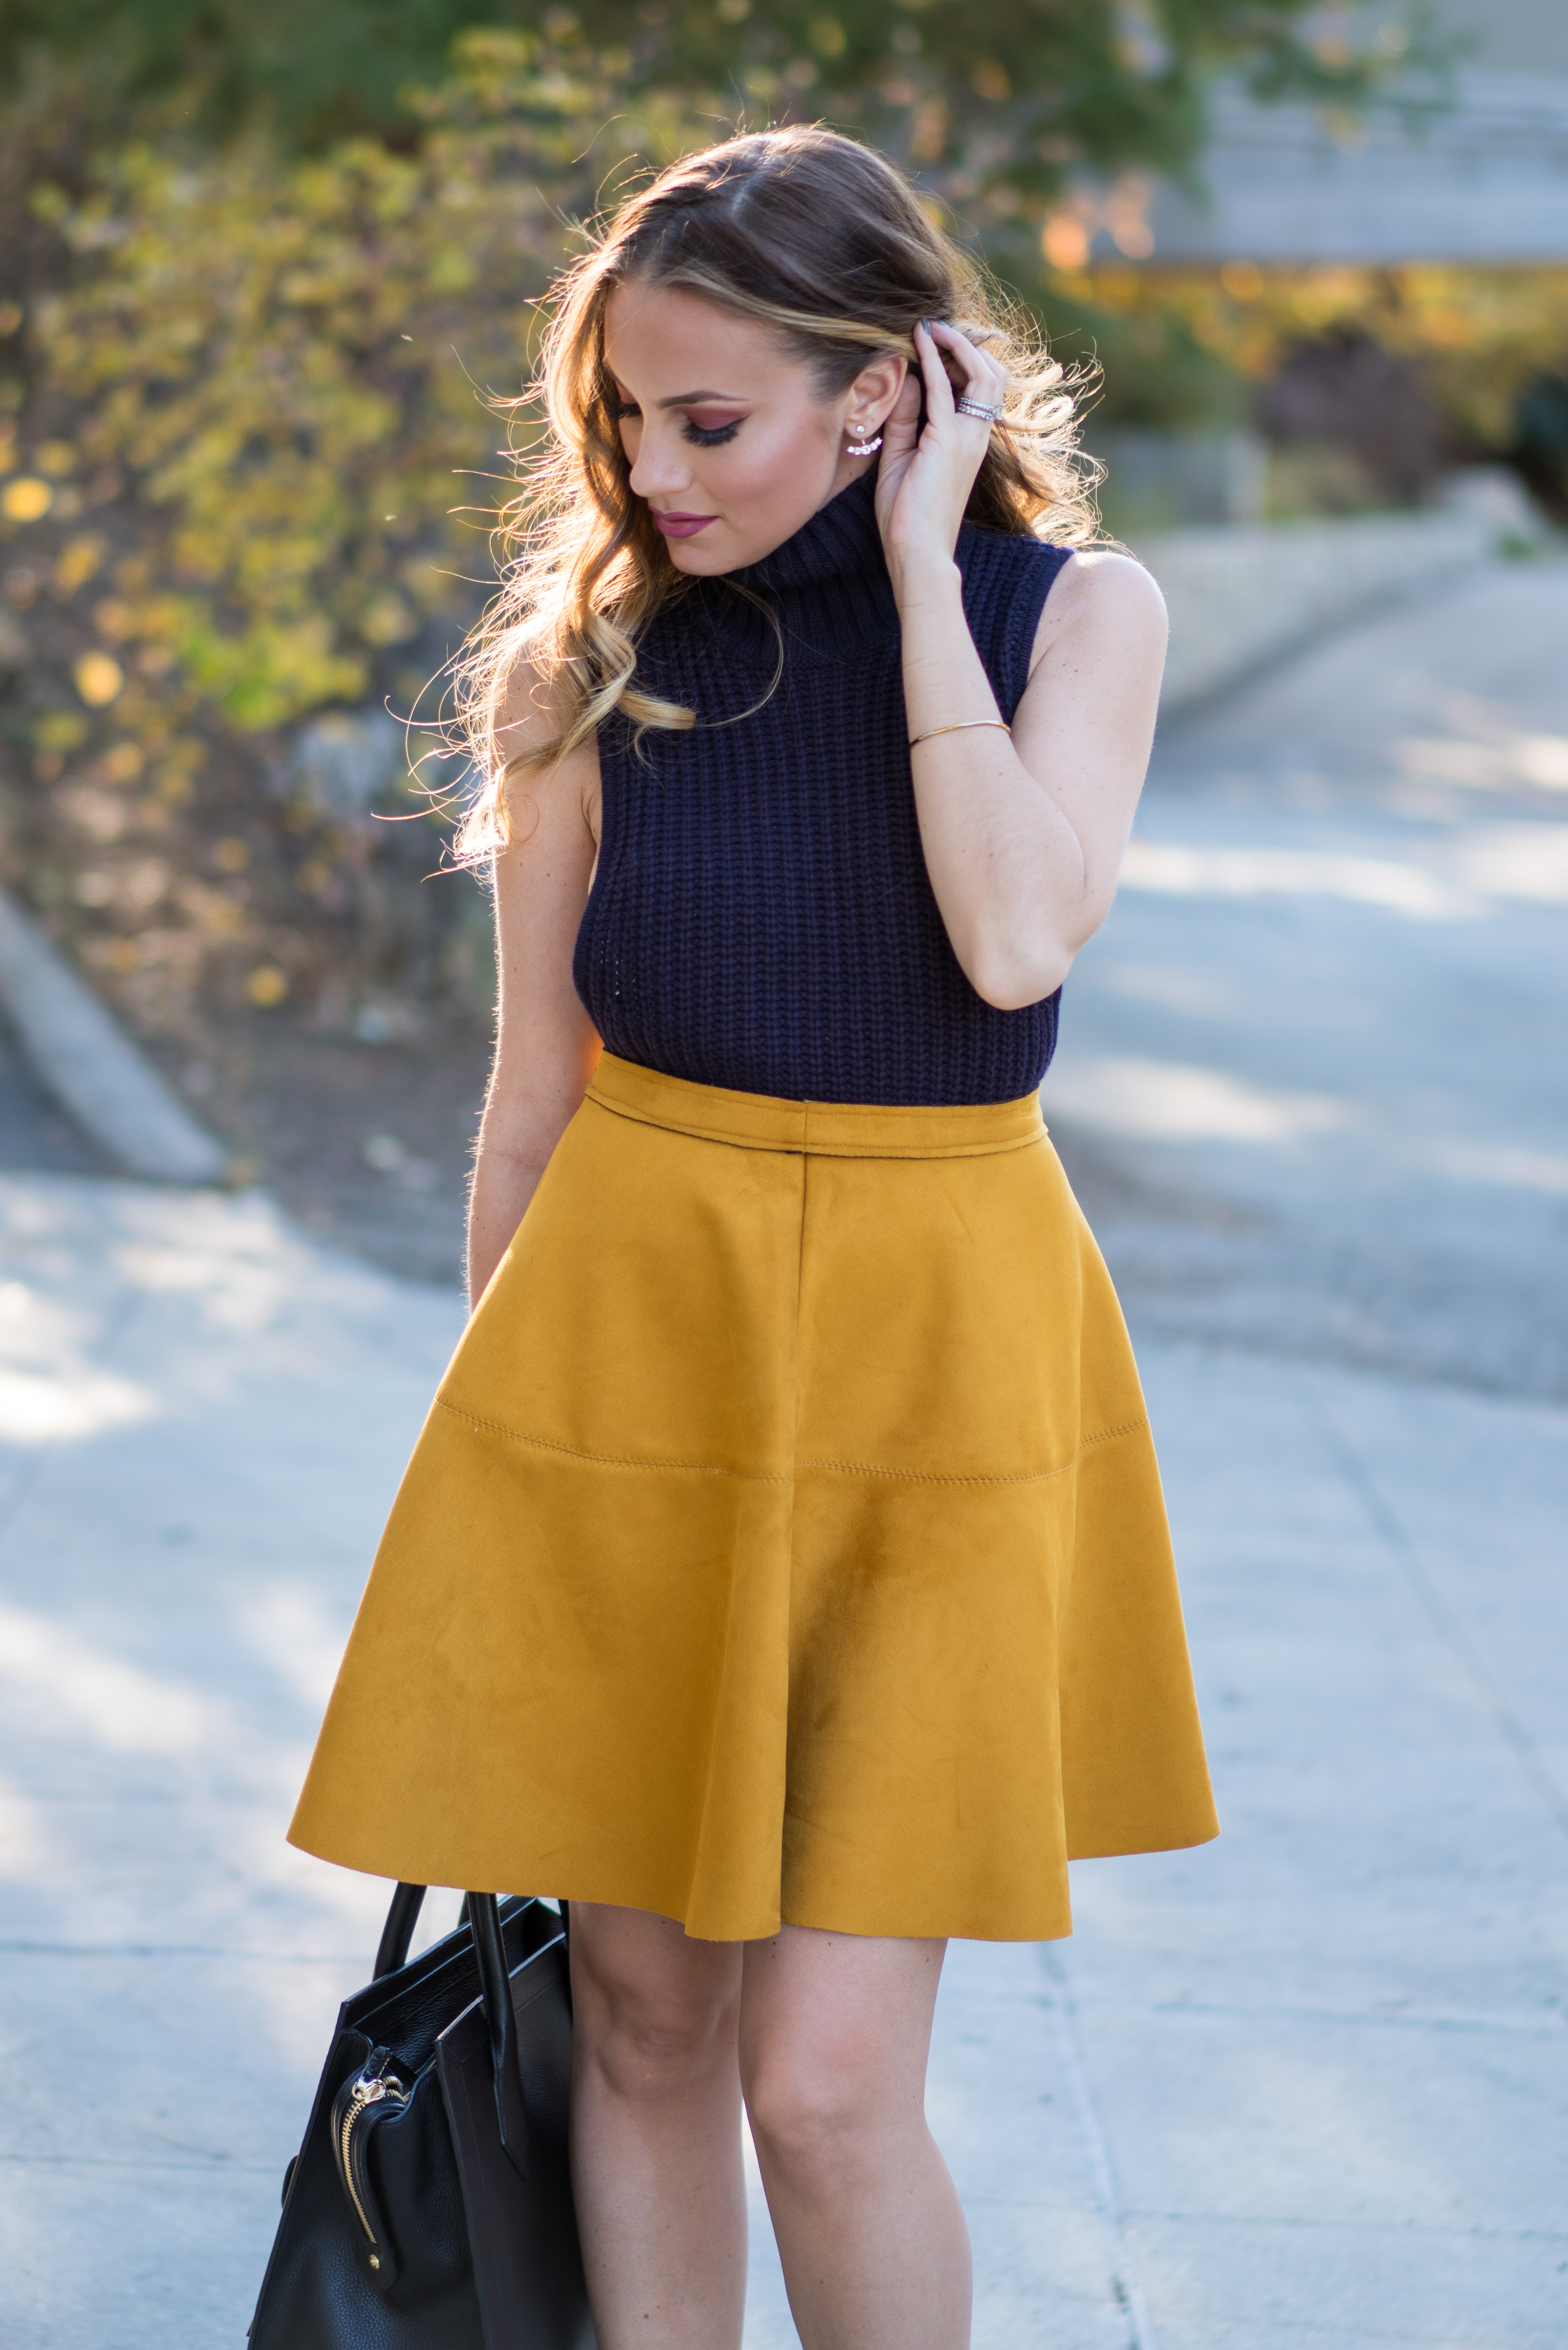 Fall Go-To Outfits - Mustard Yellow Skirt Outfit | ShopLook